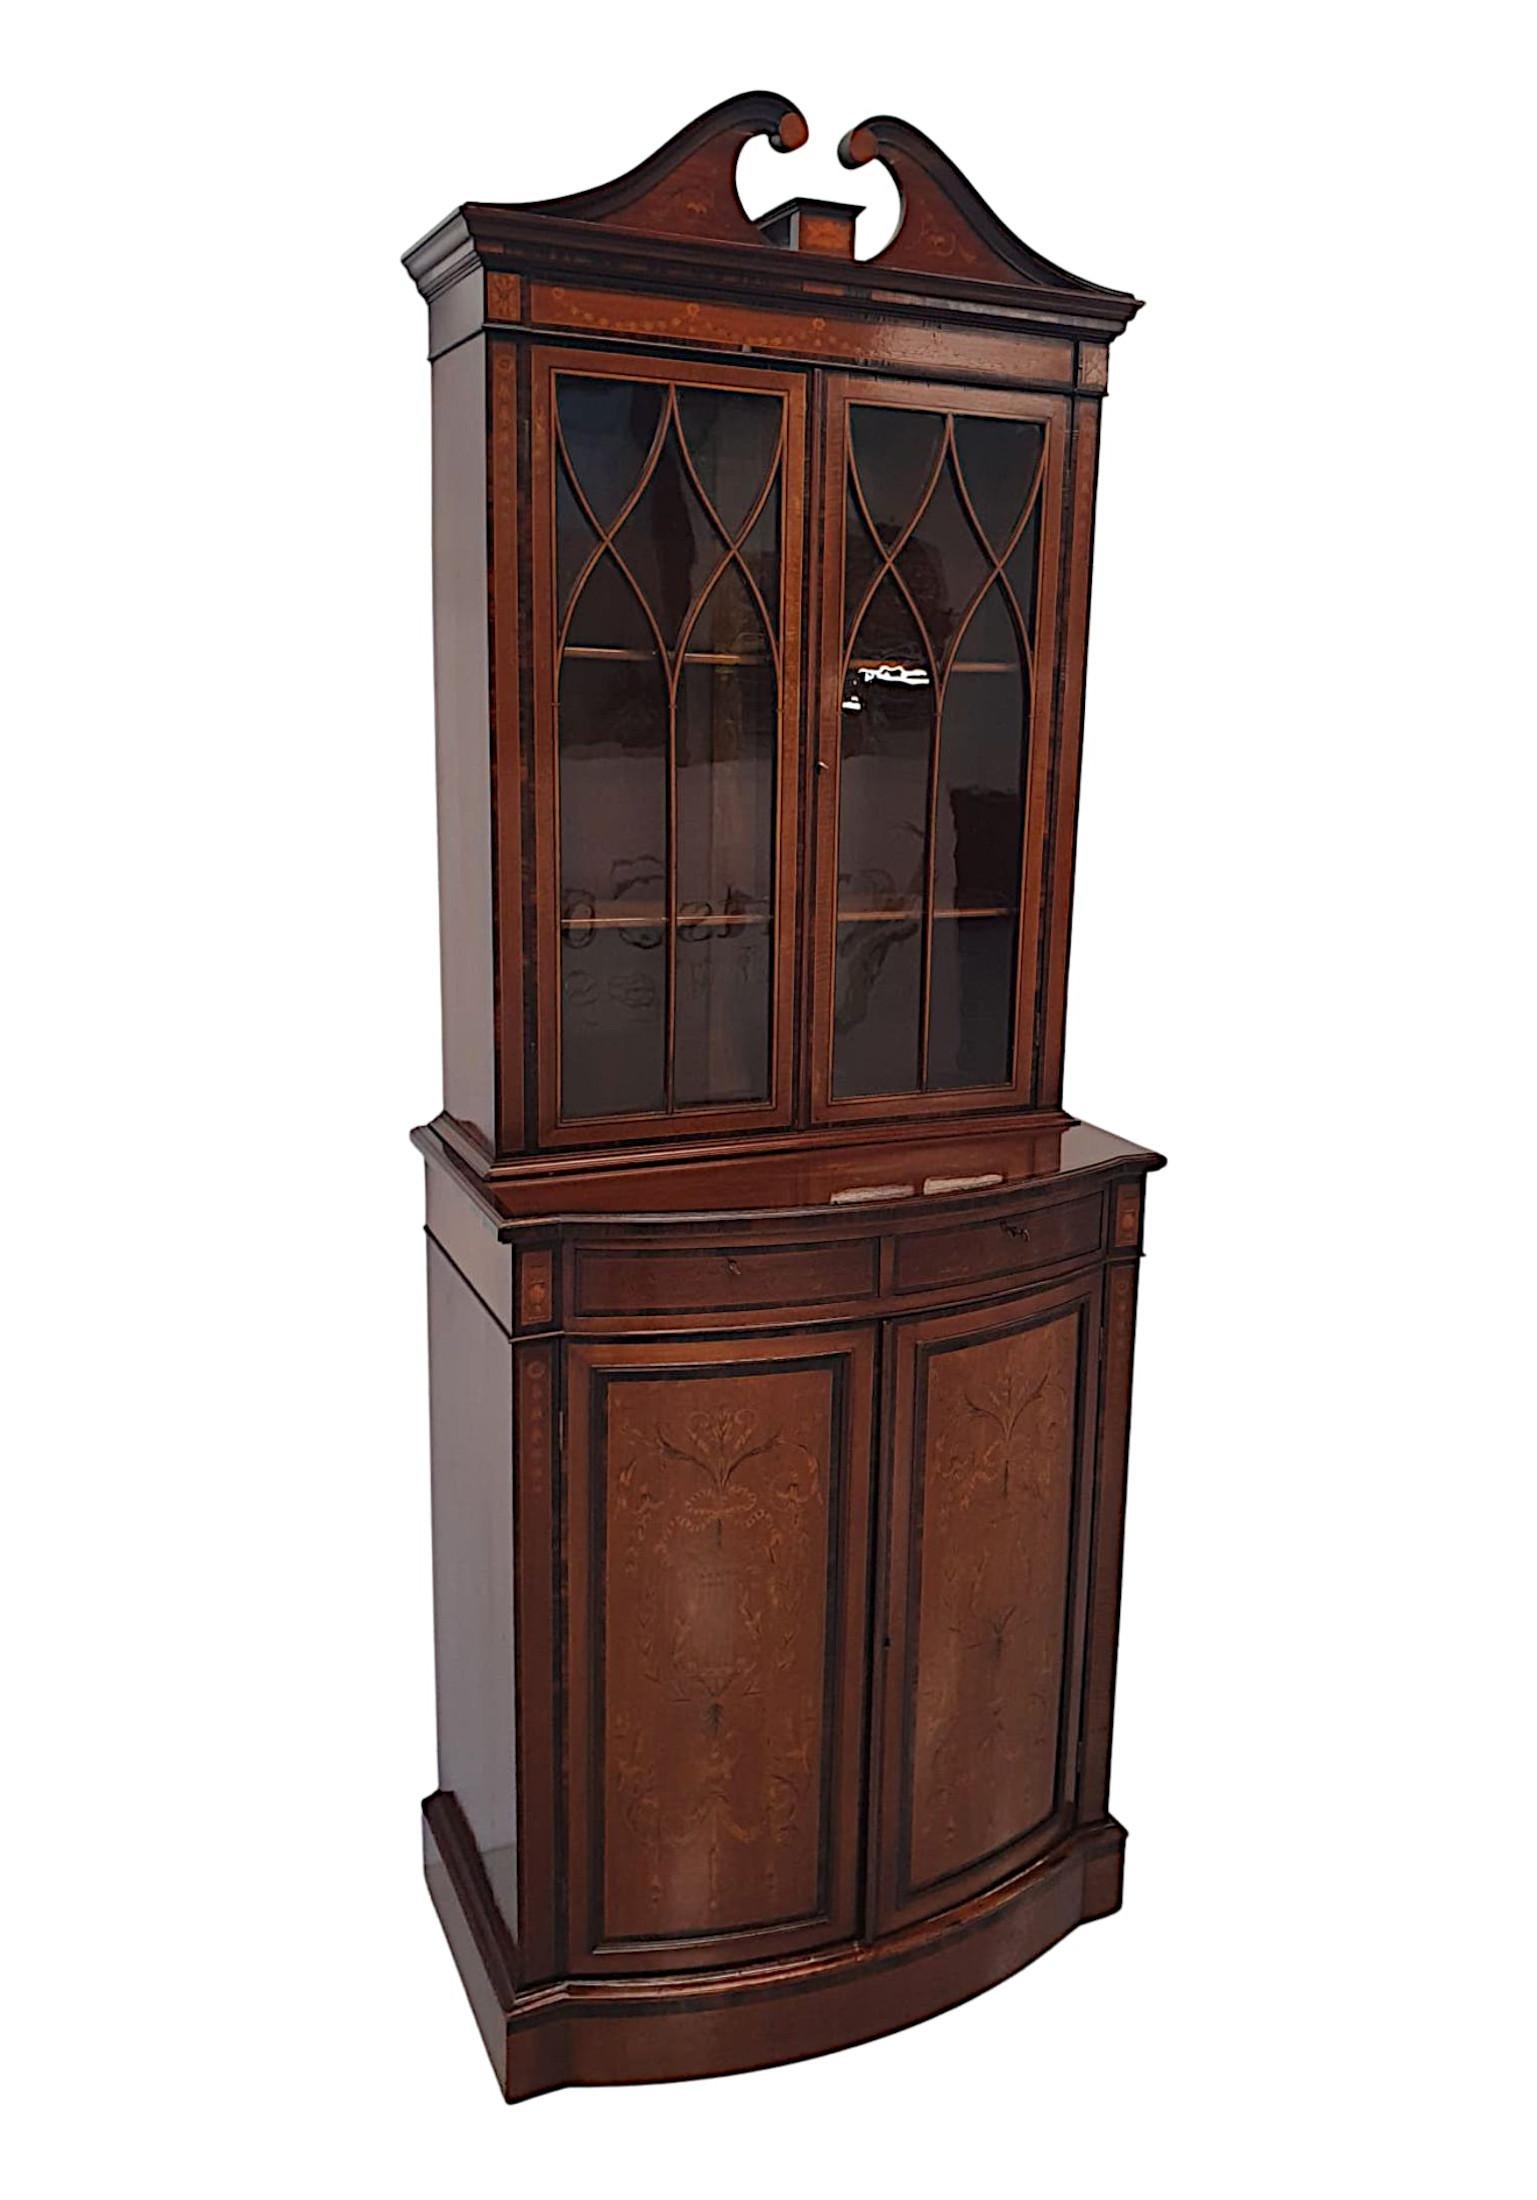 A fine Edwardian mahogany two door bookcase of neat proportions, with ebonised detail and intricate marquetry inlay throughout depicting Neoclassical motifs featuring an urn, lyres, trailing bell husks, ribbon bow swags, garlands, flowerheads and